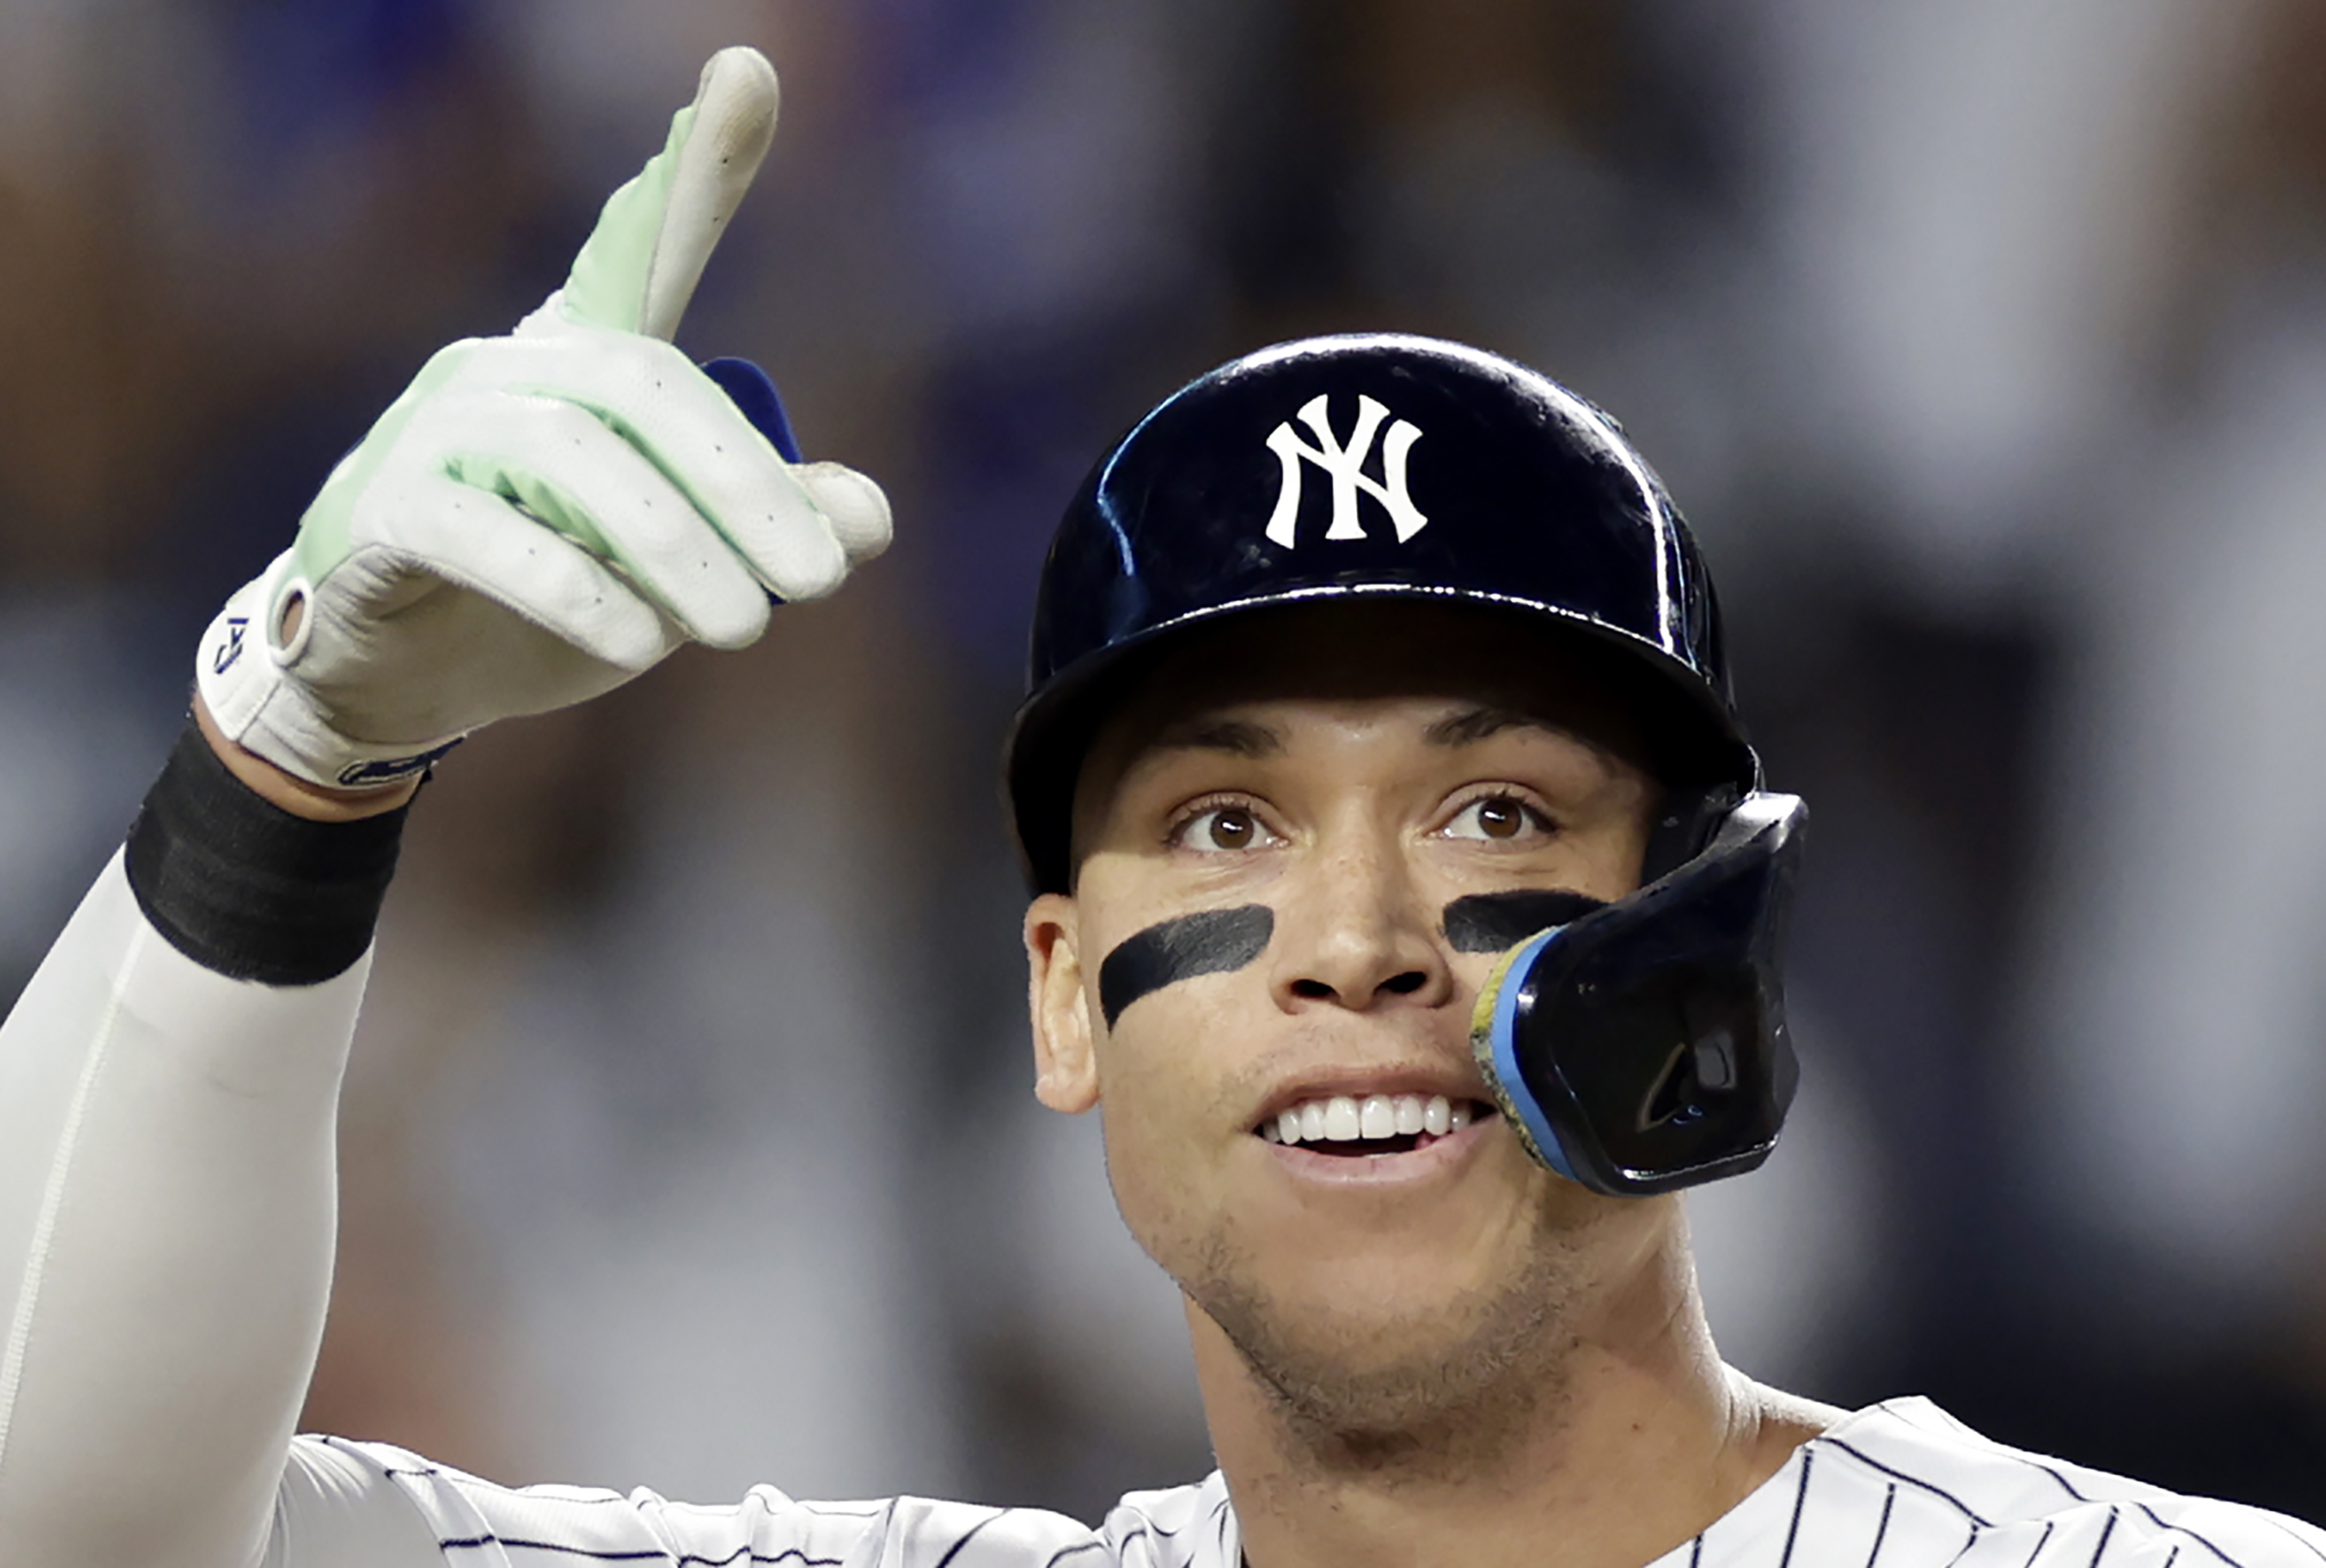 Aaron Judge's 61st HR another murky milestone for MLB